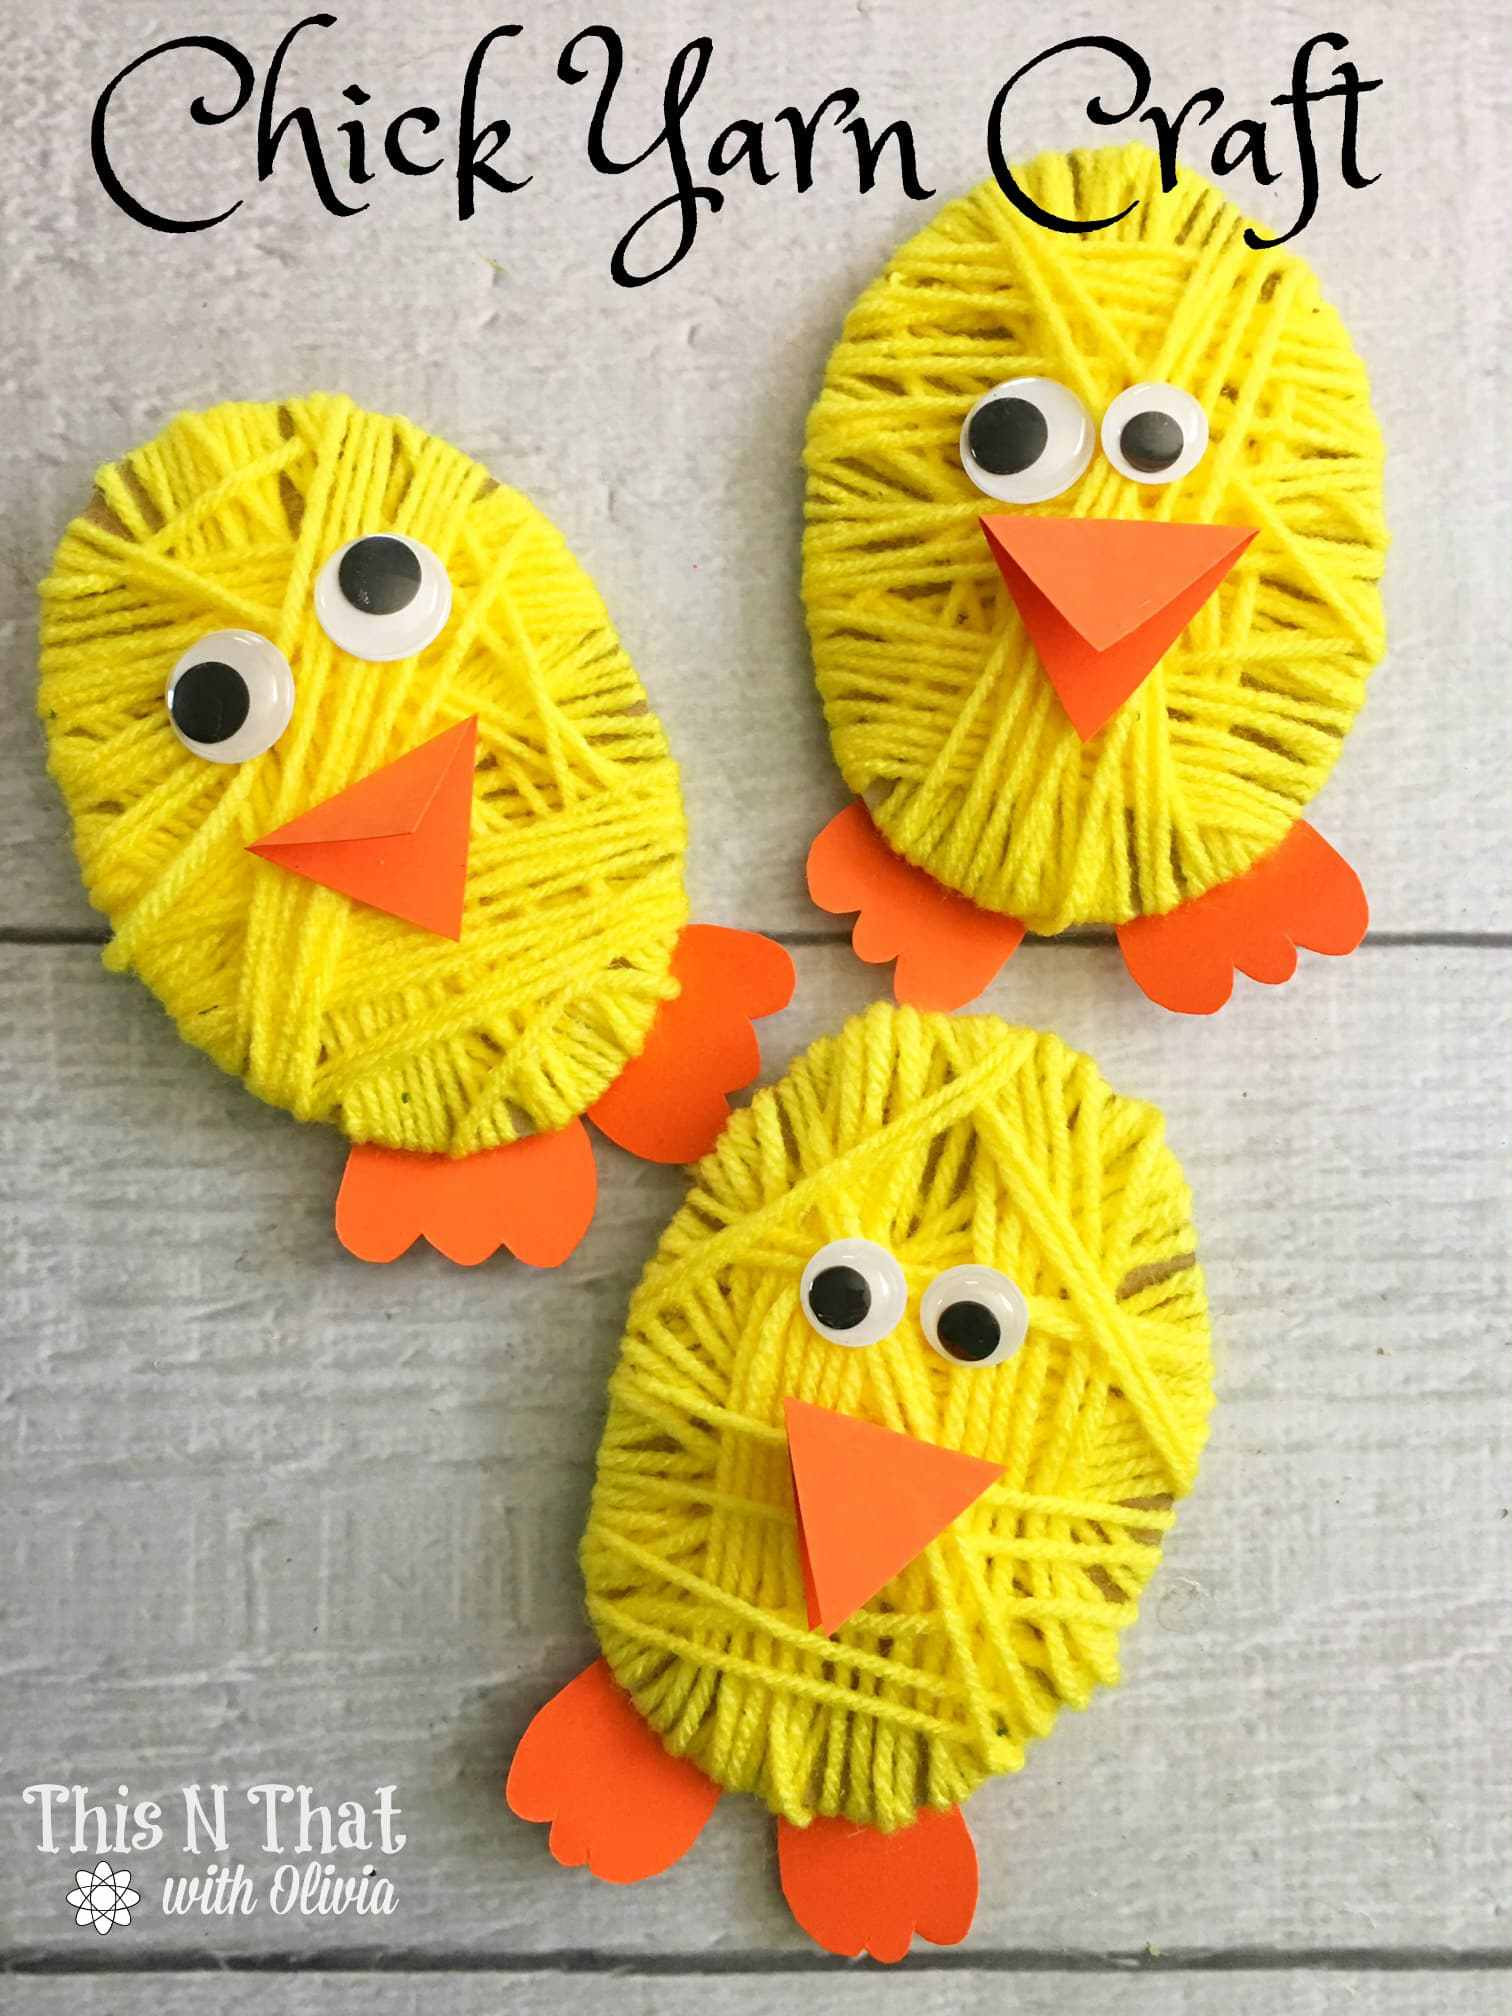 Preschool Spring Crafts Ideas
 Over 33 Easter Craft Ideas for Kids to Make Simple Cute